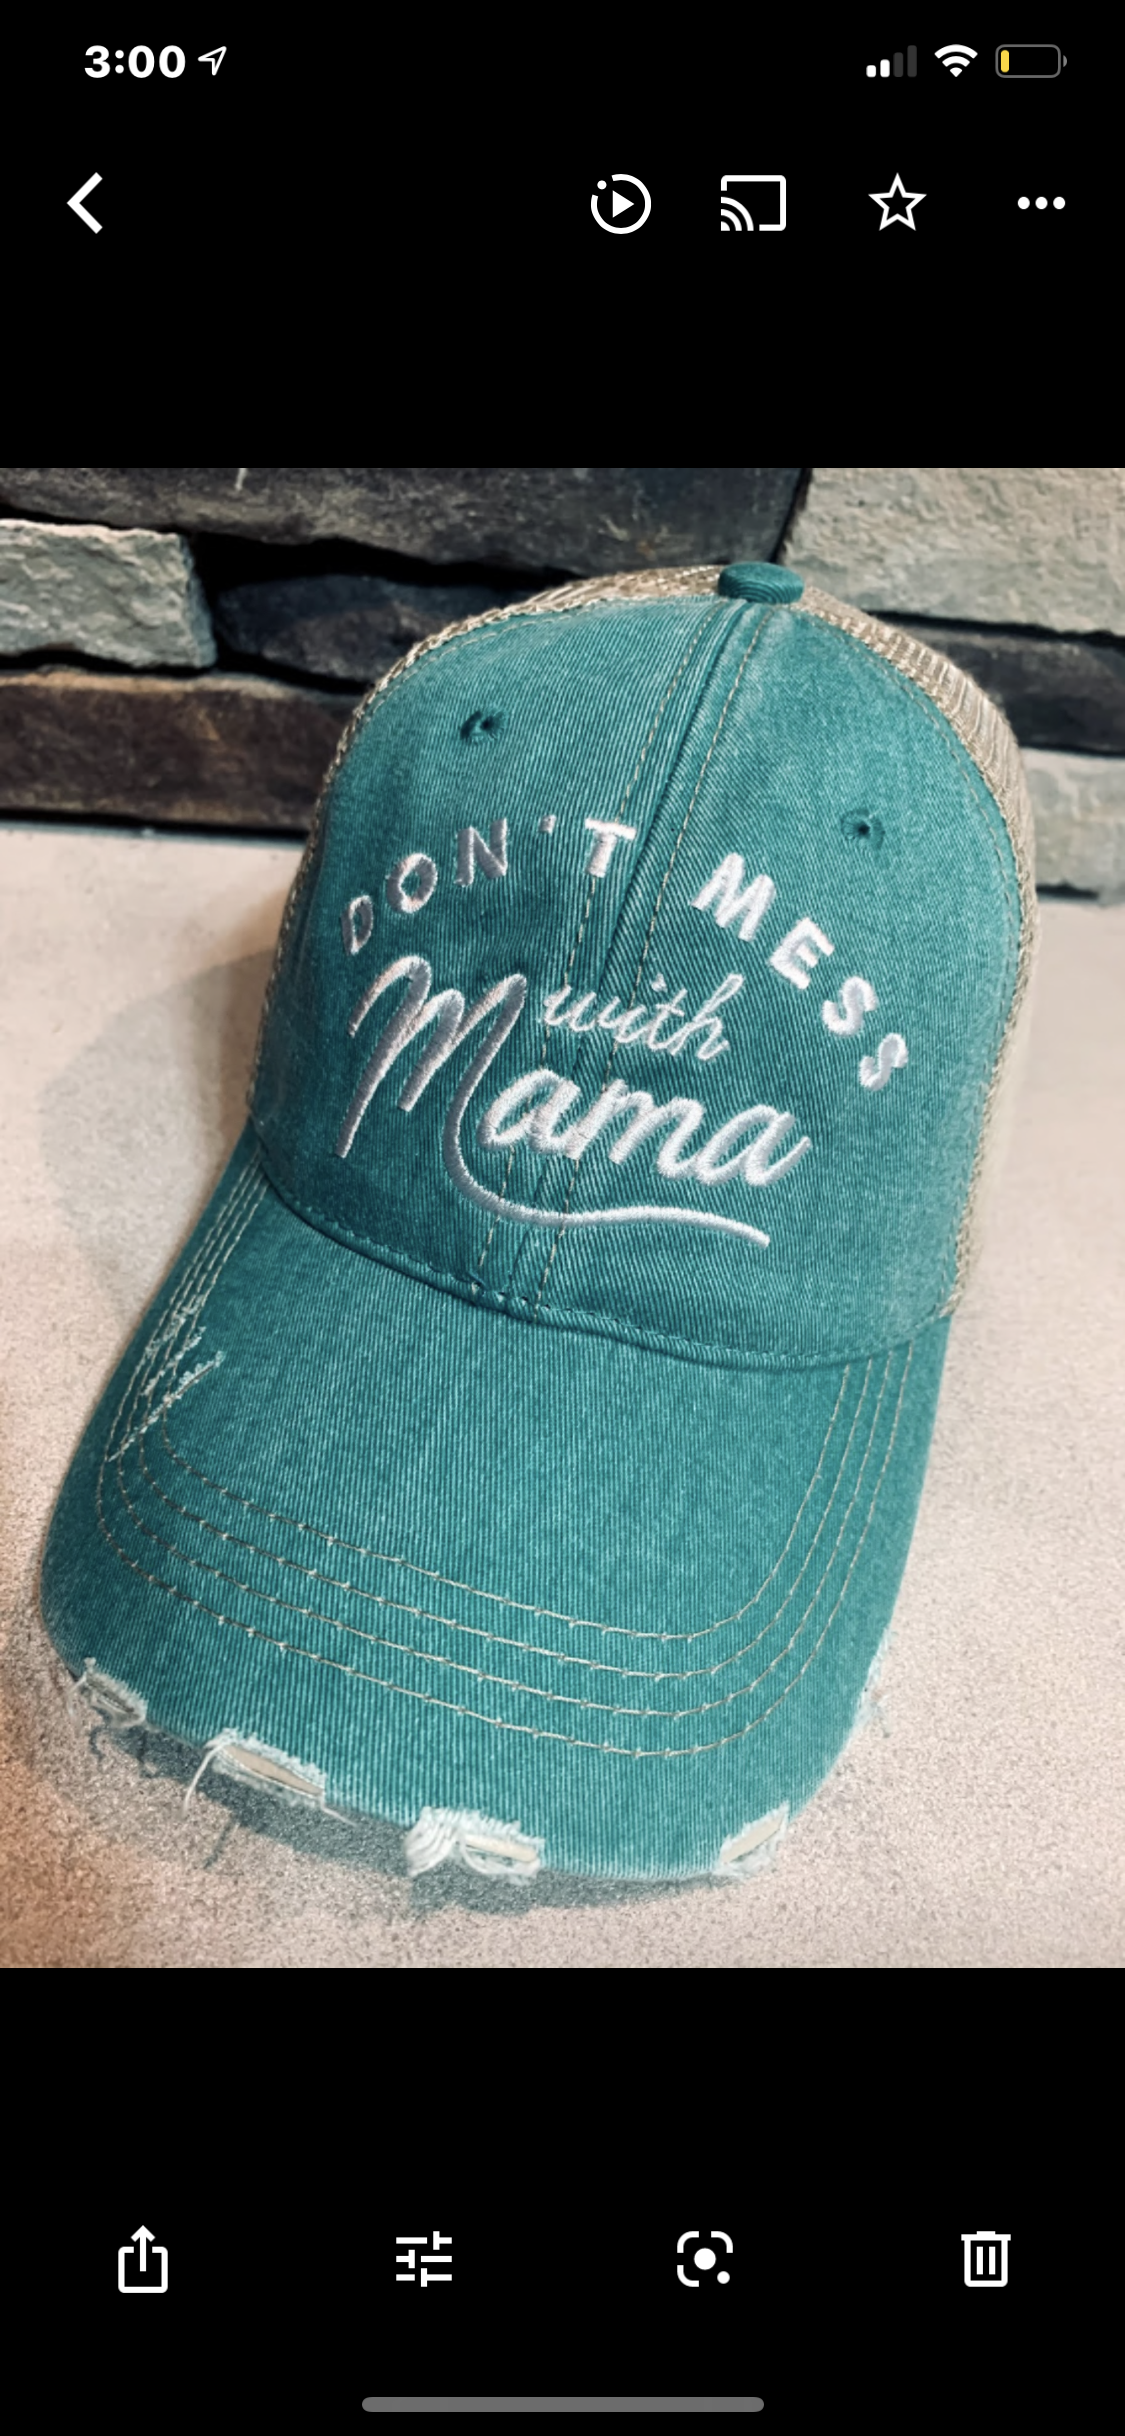 Lacrosse hats Lacrosse mom Lacrosse hair dont care Embroidered womens trucker caps - Stacy's Pink Martini Boutique